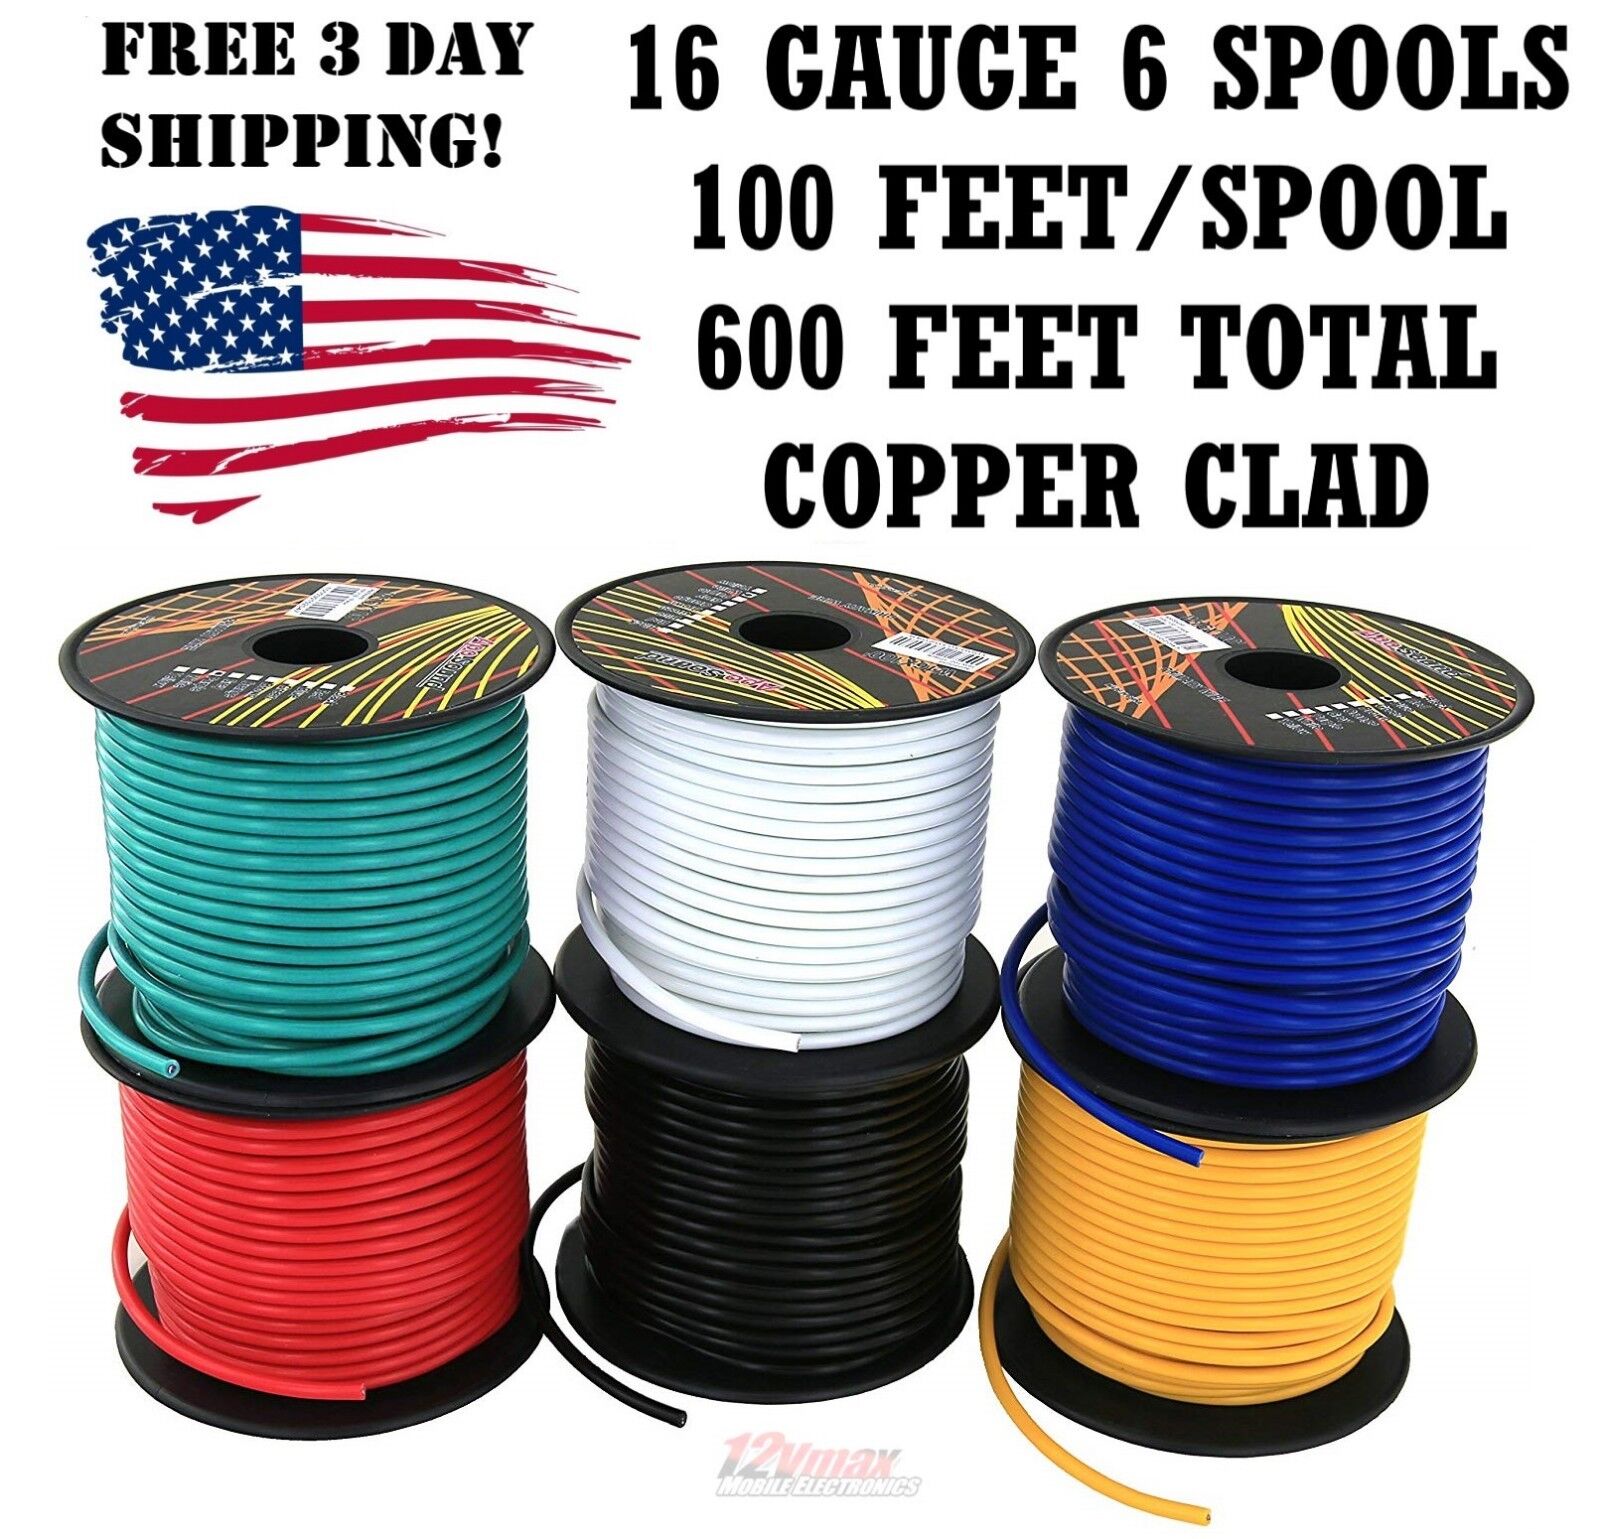 16 GA GAUGE 100 FT SPOOLS COPPER CLAD REMOTE POWER GROUND WIRE PRIMARY 6 Pack 